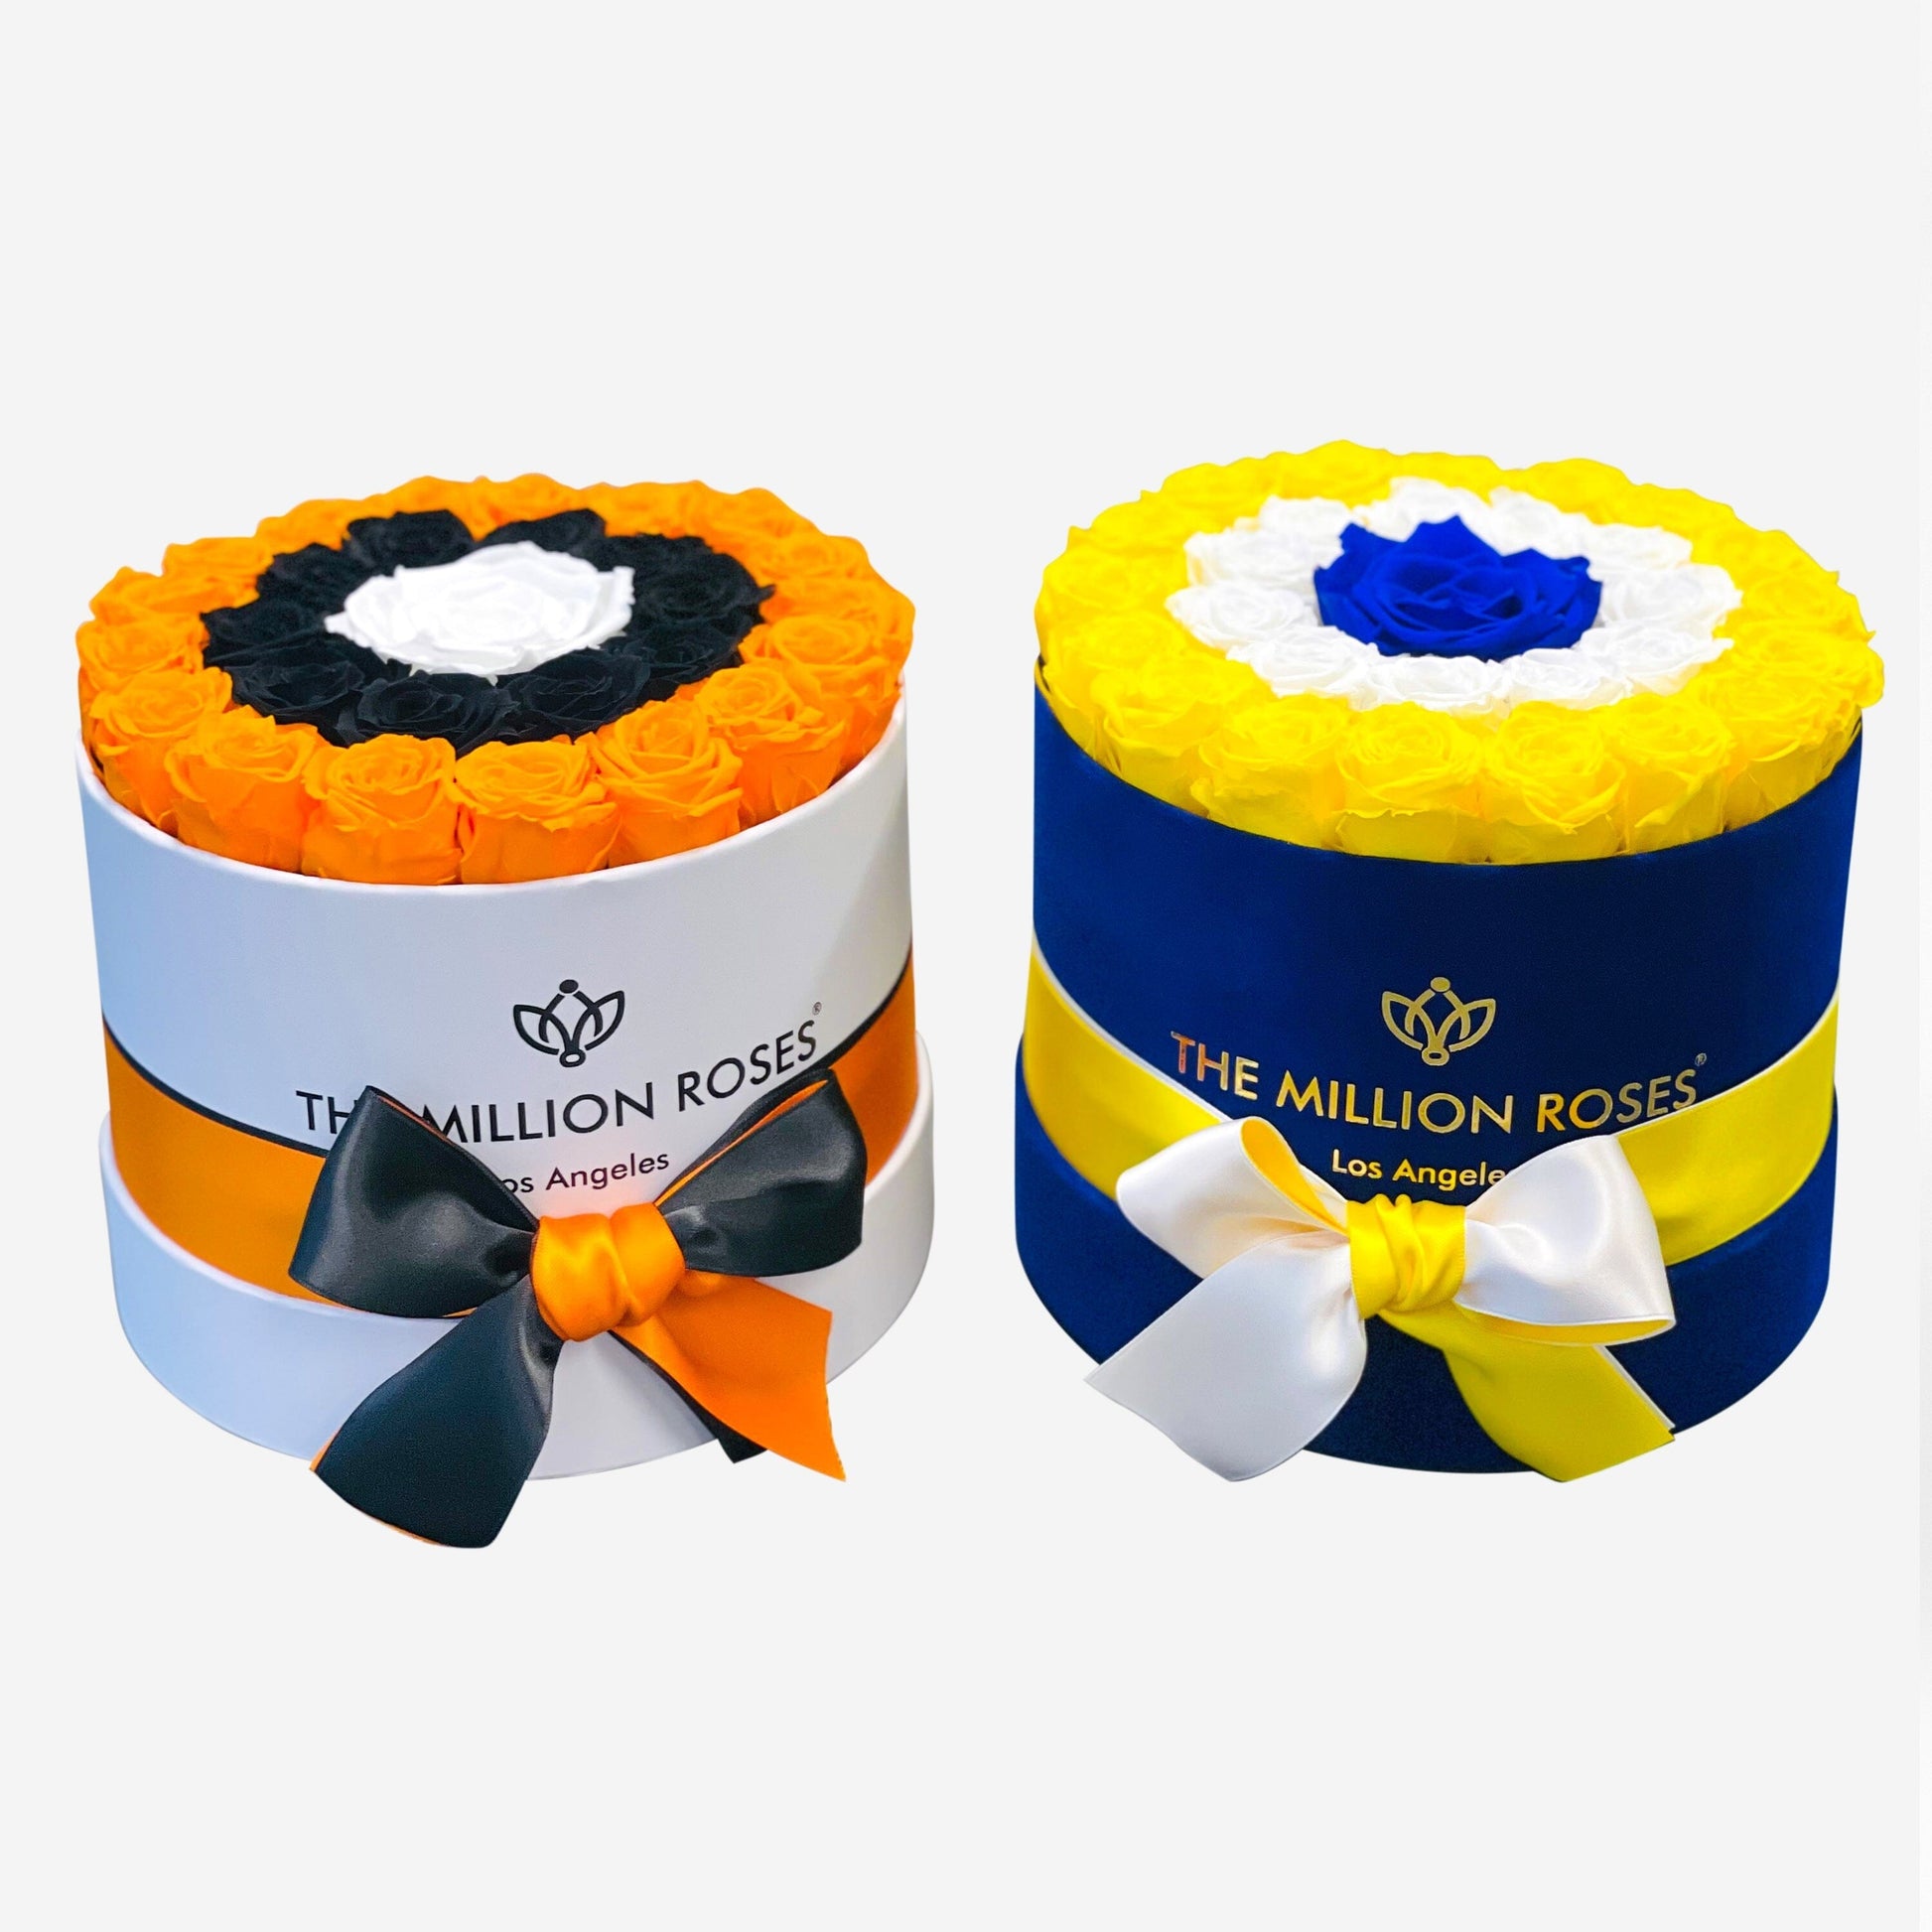 Classic Royal Blue Suede Box | Los Angeles Edition | Yellow & White & Royal Blue Roses - The Million Roses